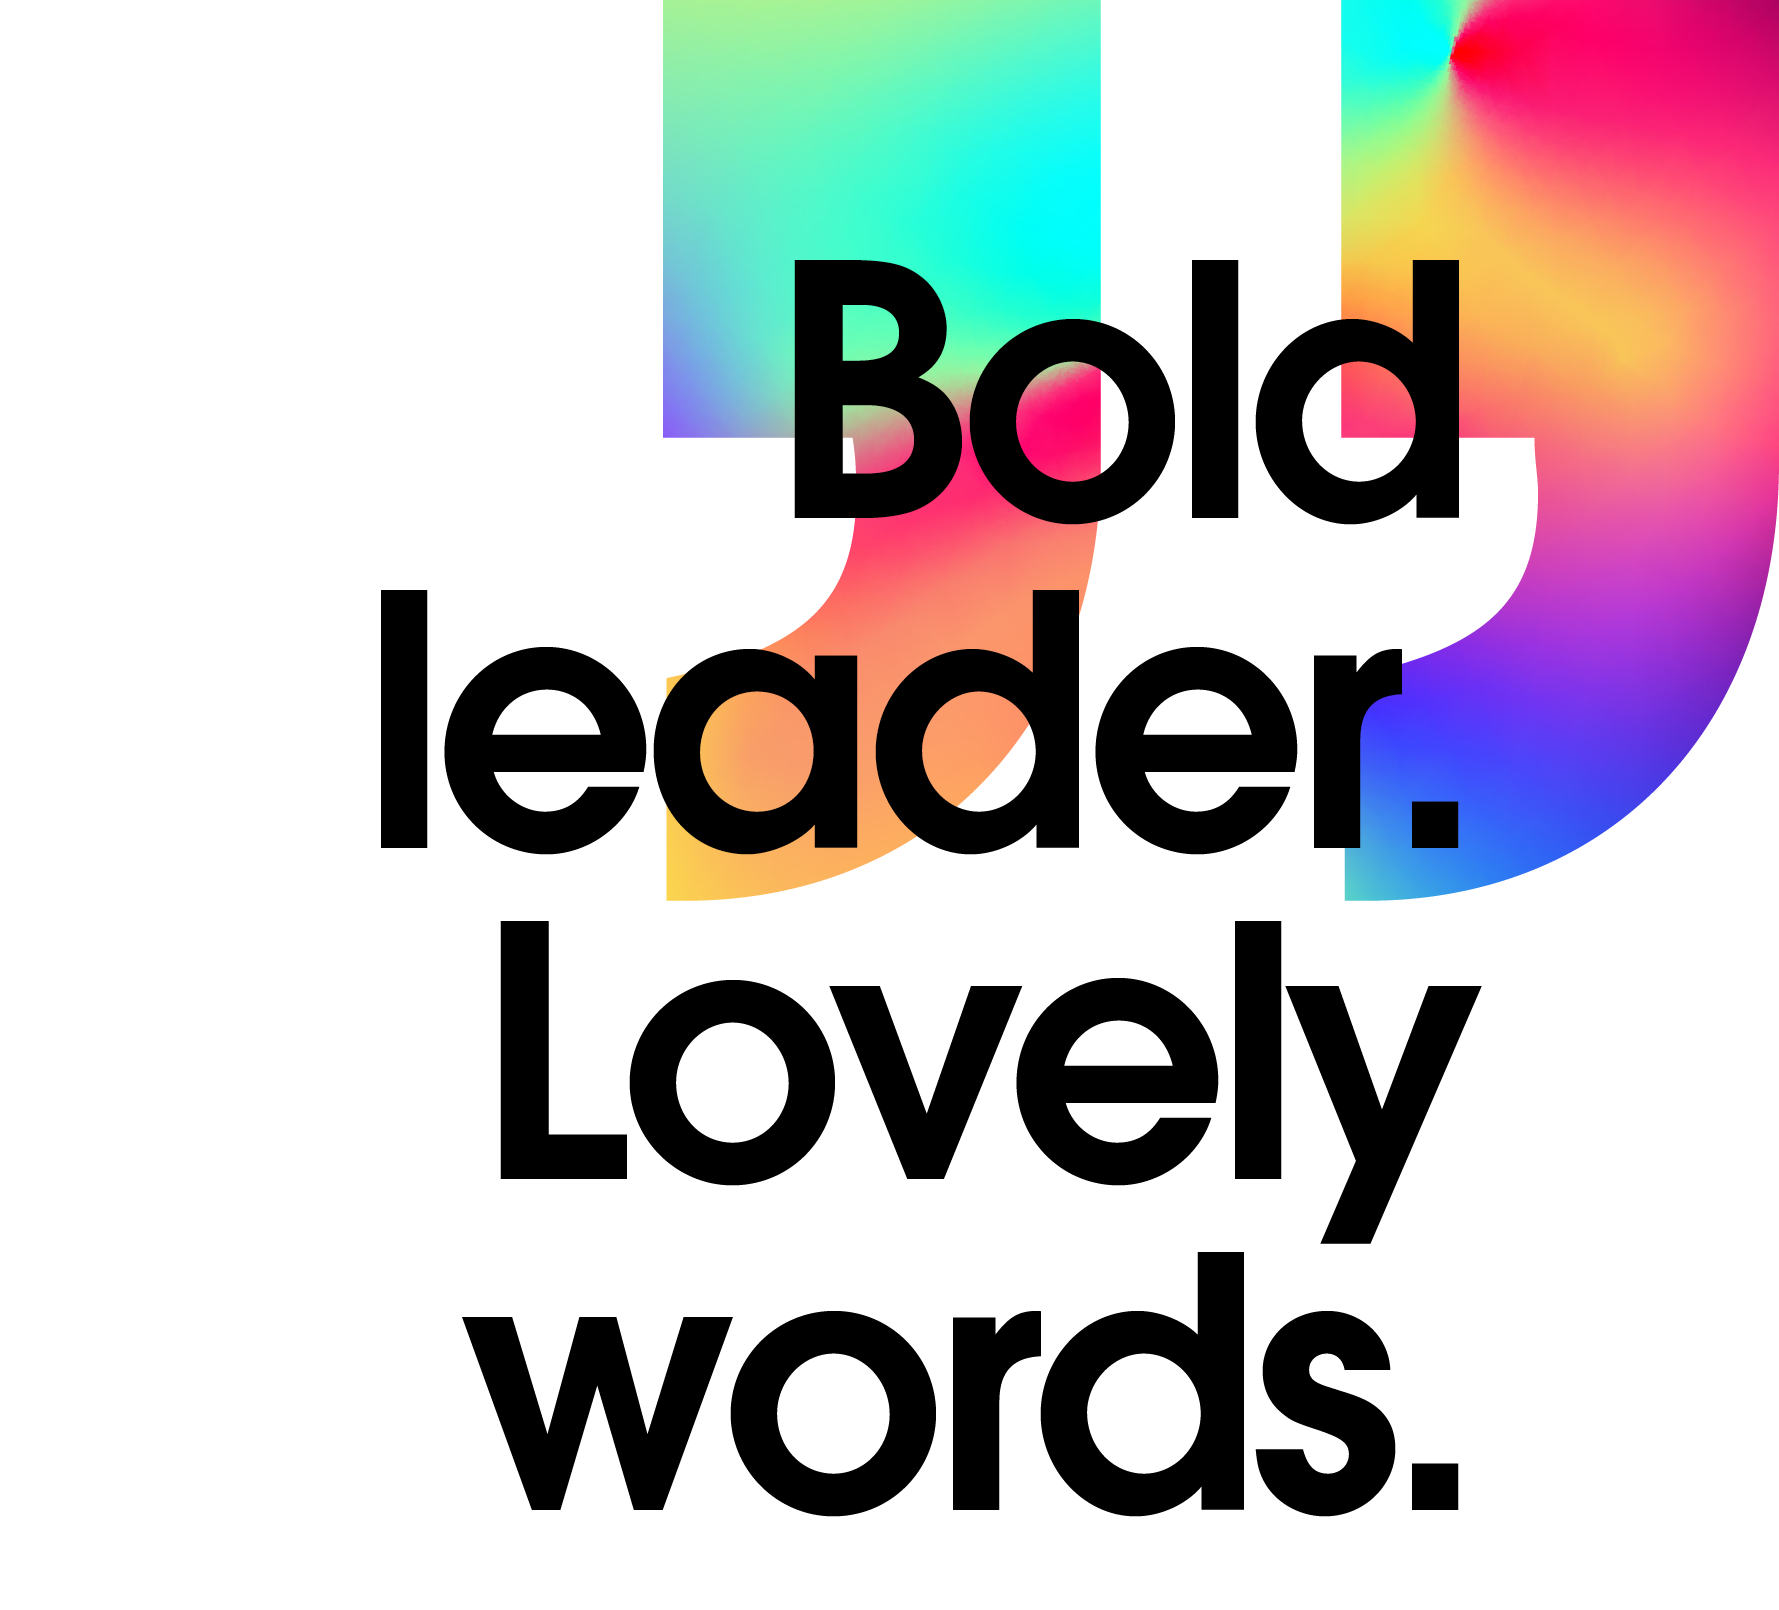 Bold leaders, lovely words